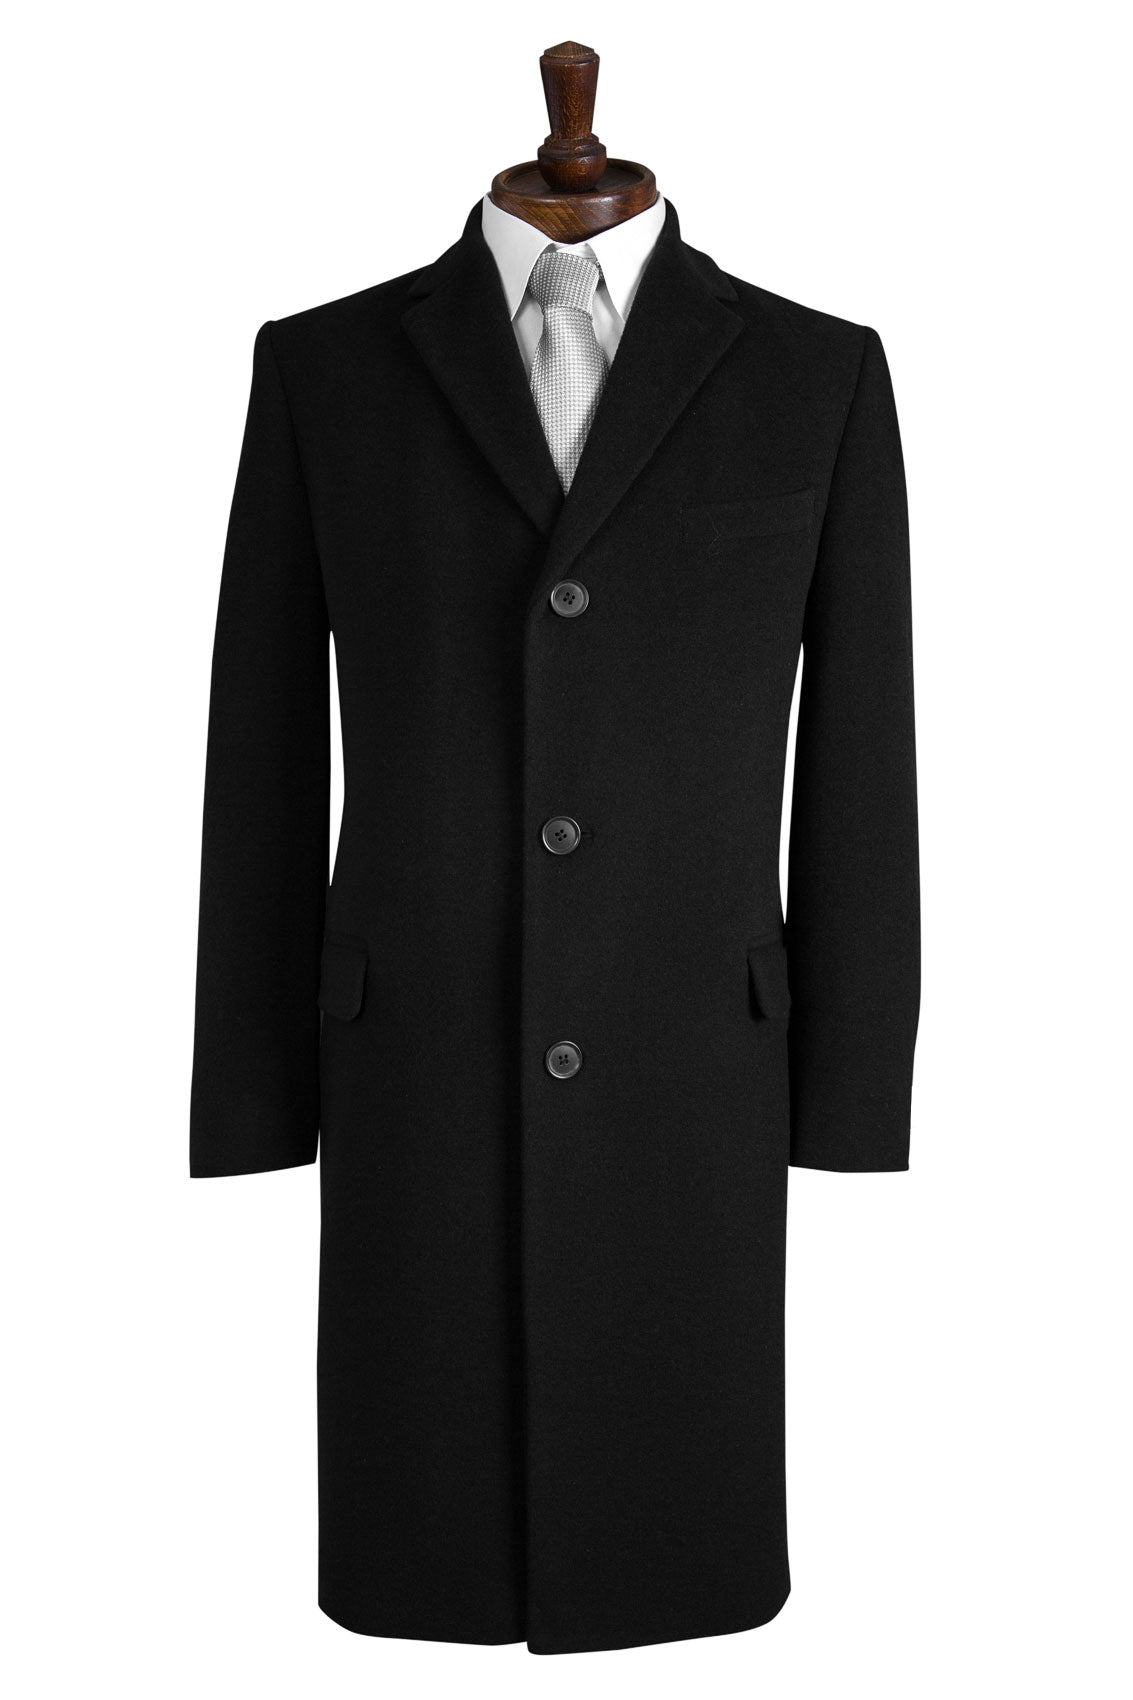 Black Wool Overcoat with Red Satin Lining- Brand New